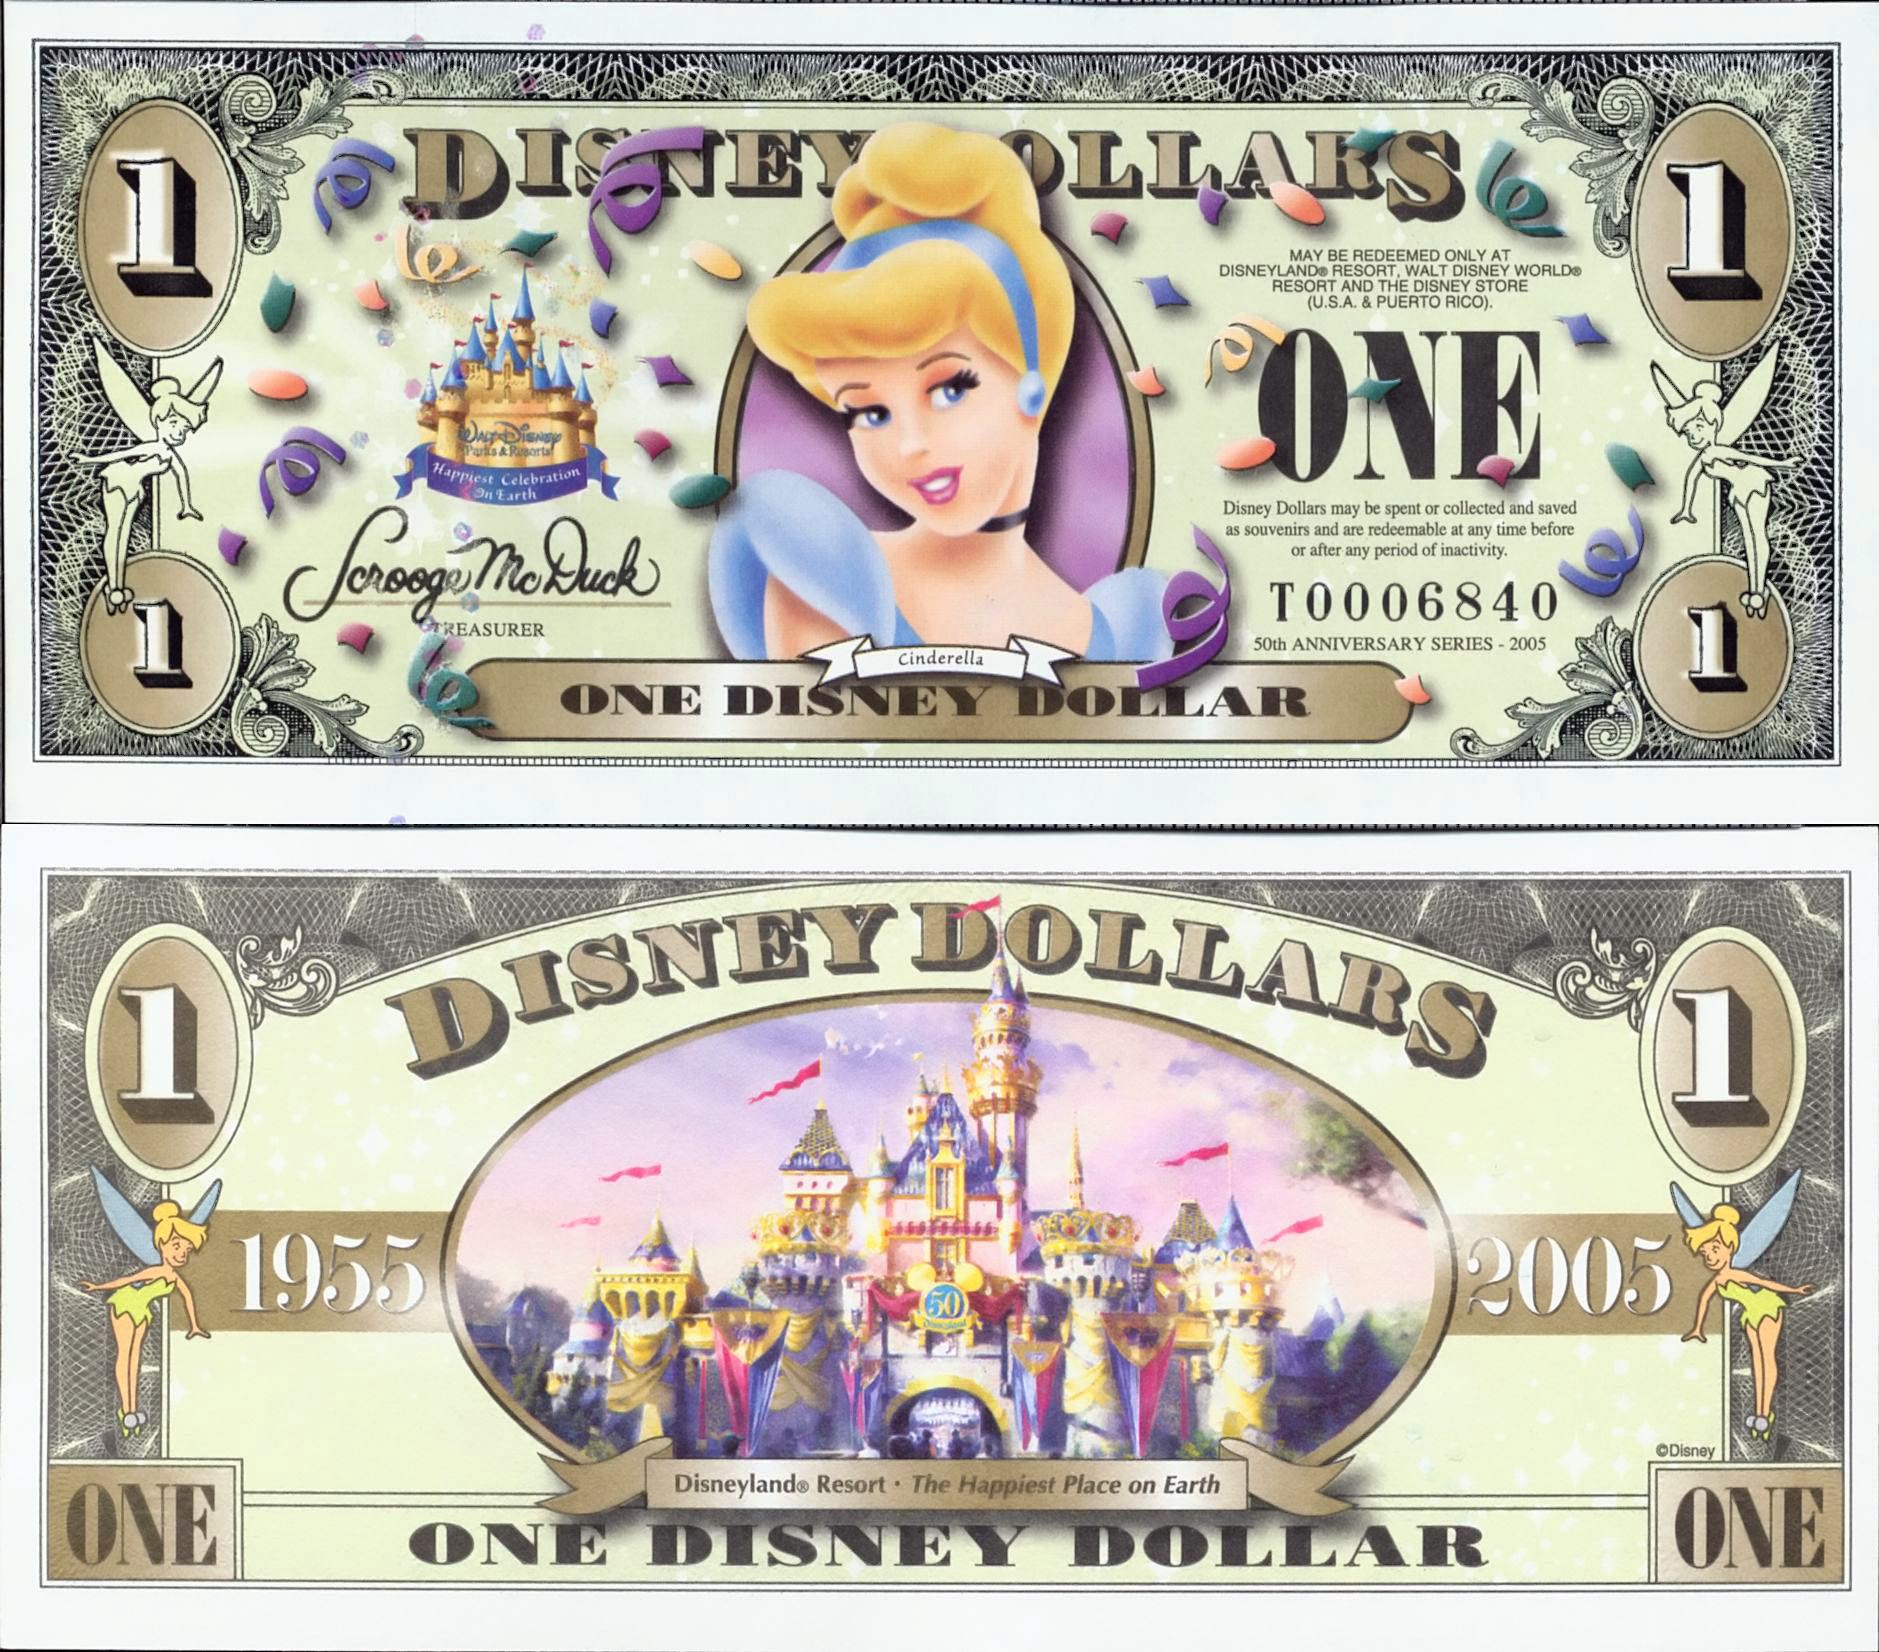 Disney Dollars Currency with character Serial W 544404